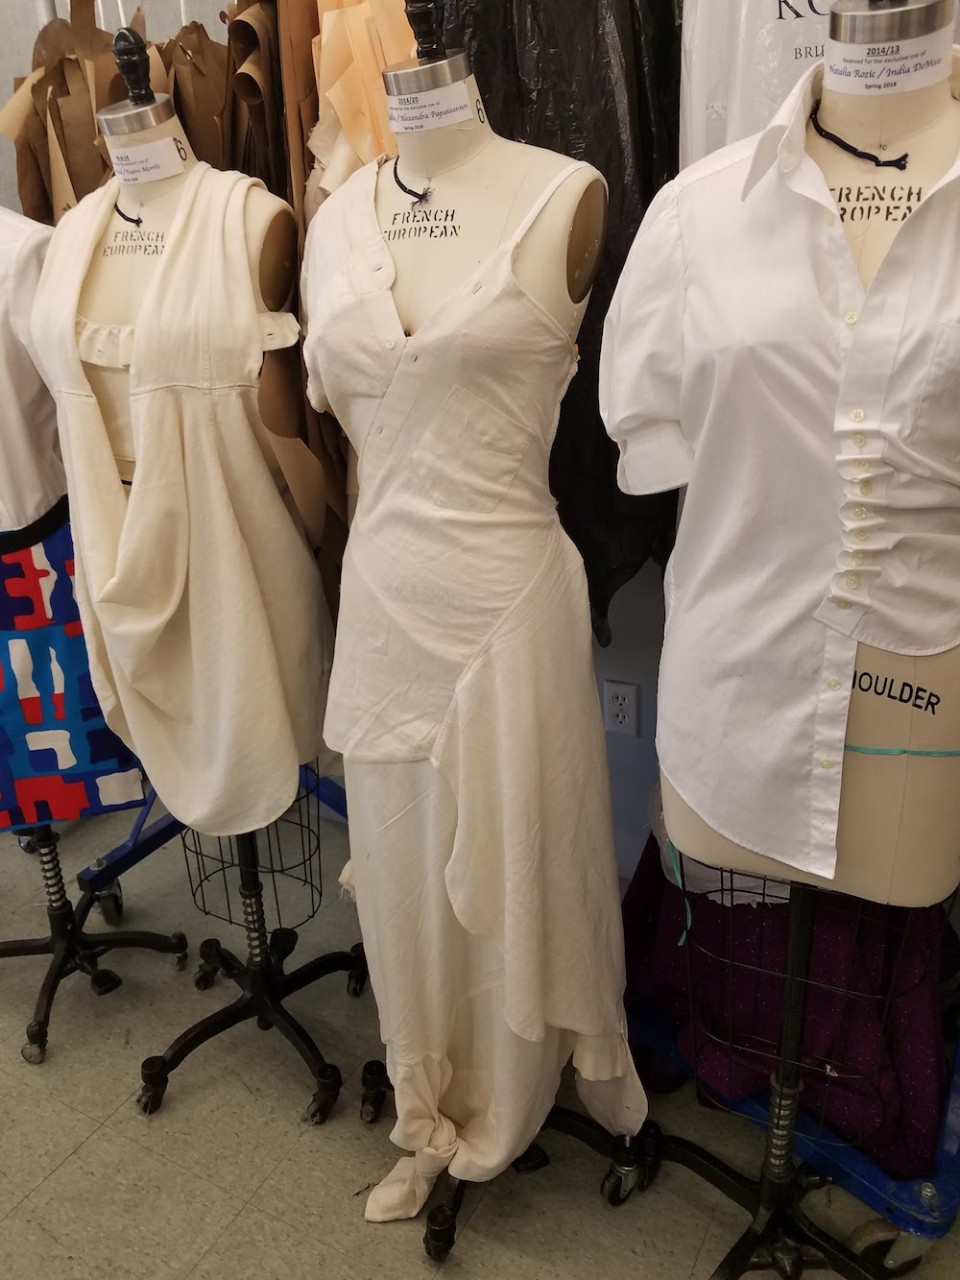 Garments made from two white button-up shirts on dress forms